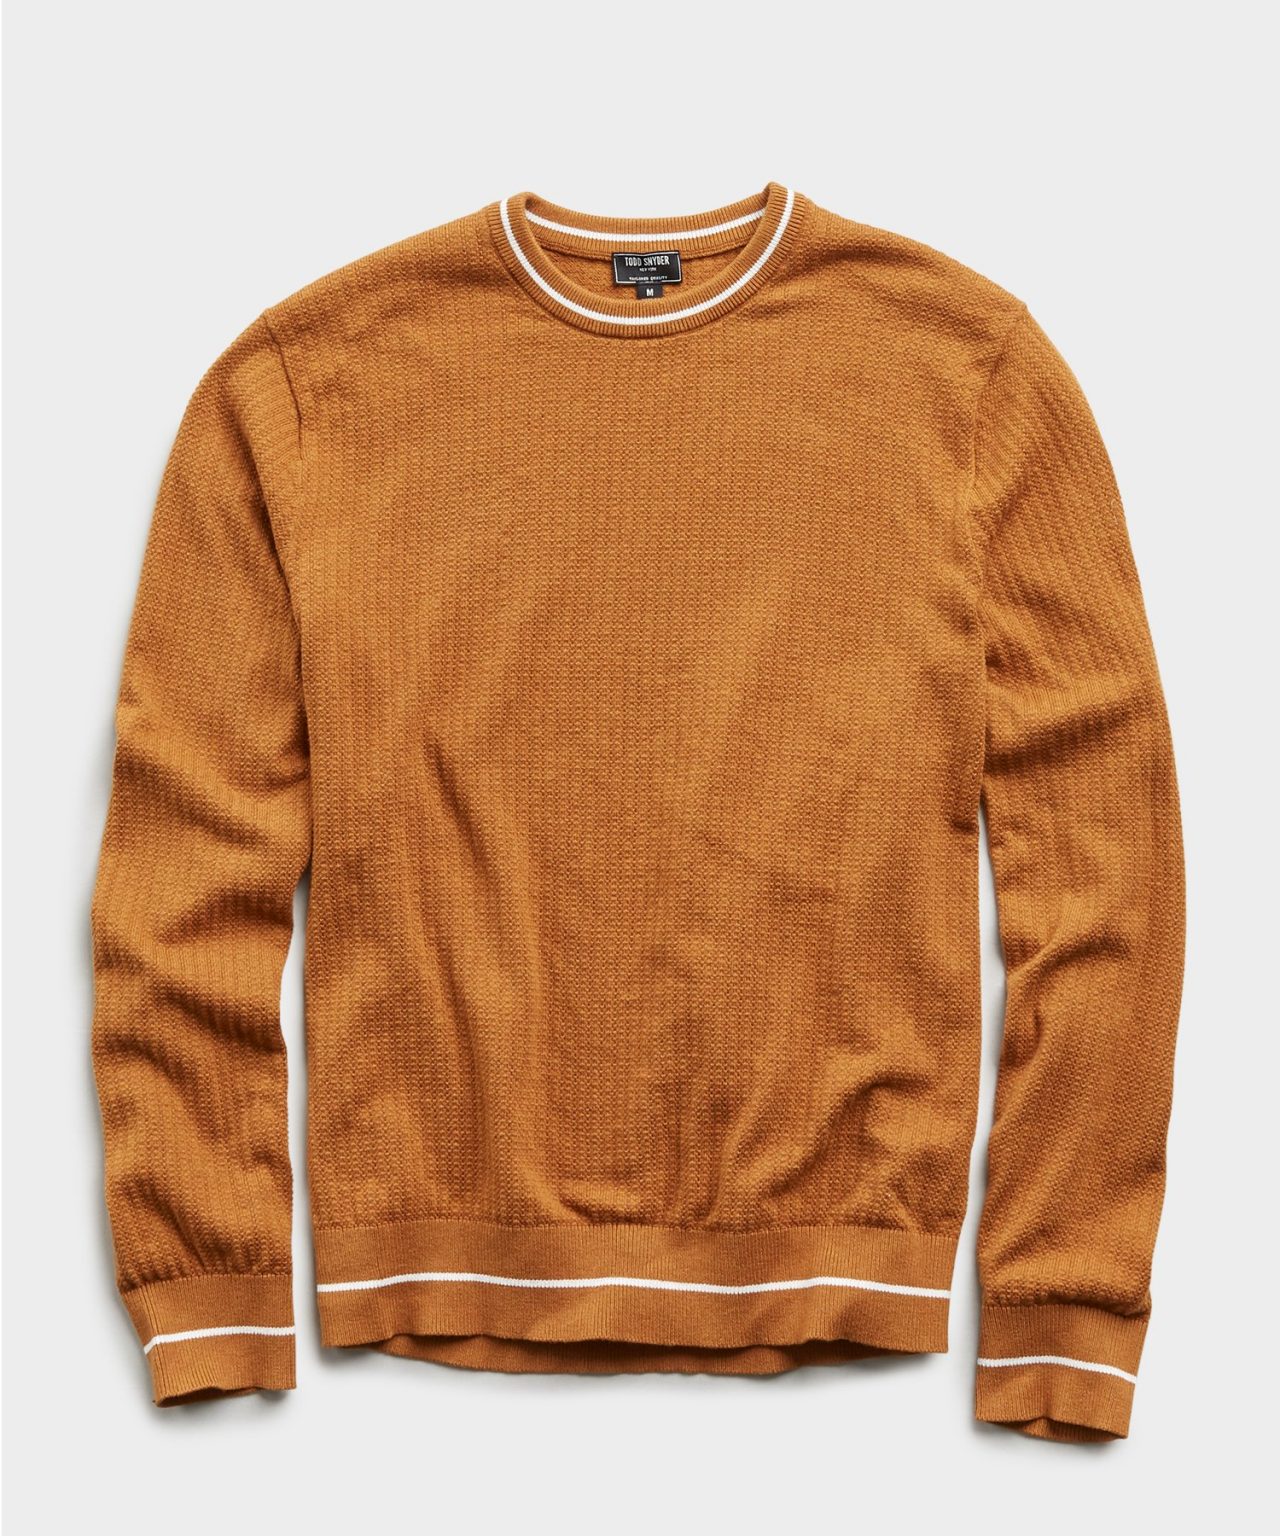 Textured Tipped Sweater in Chestnut | The Fashionisto